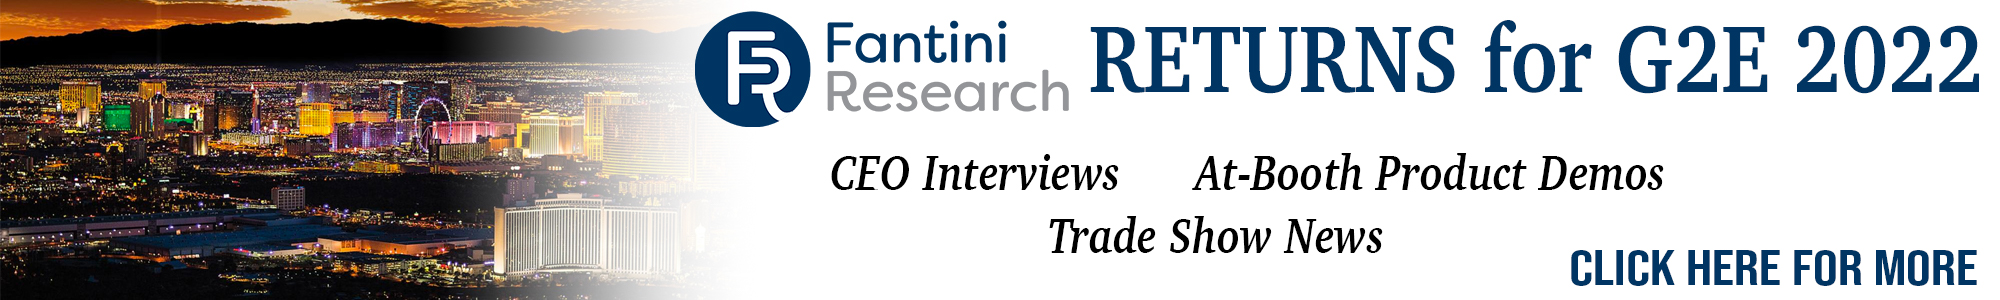 CEO_One-on-One_Interviews_At-Booth_Product_Demos_Trade_Show_News_and_More_Fantini_Research_is_back_at_G2E_2021.png